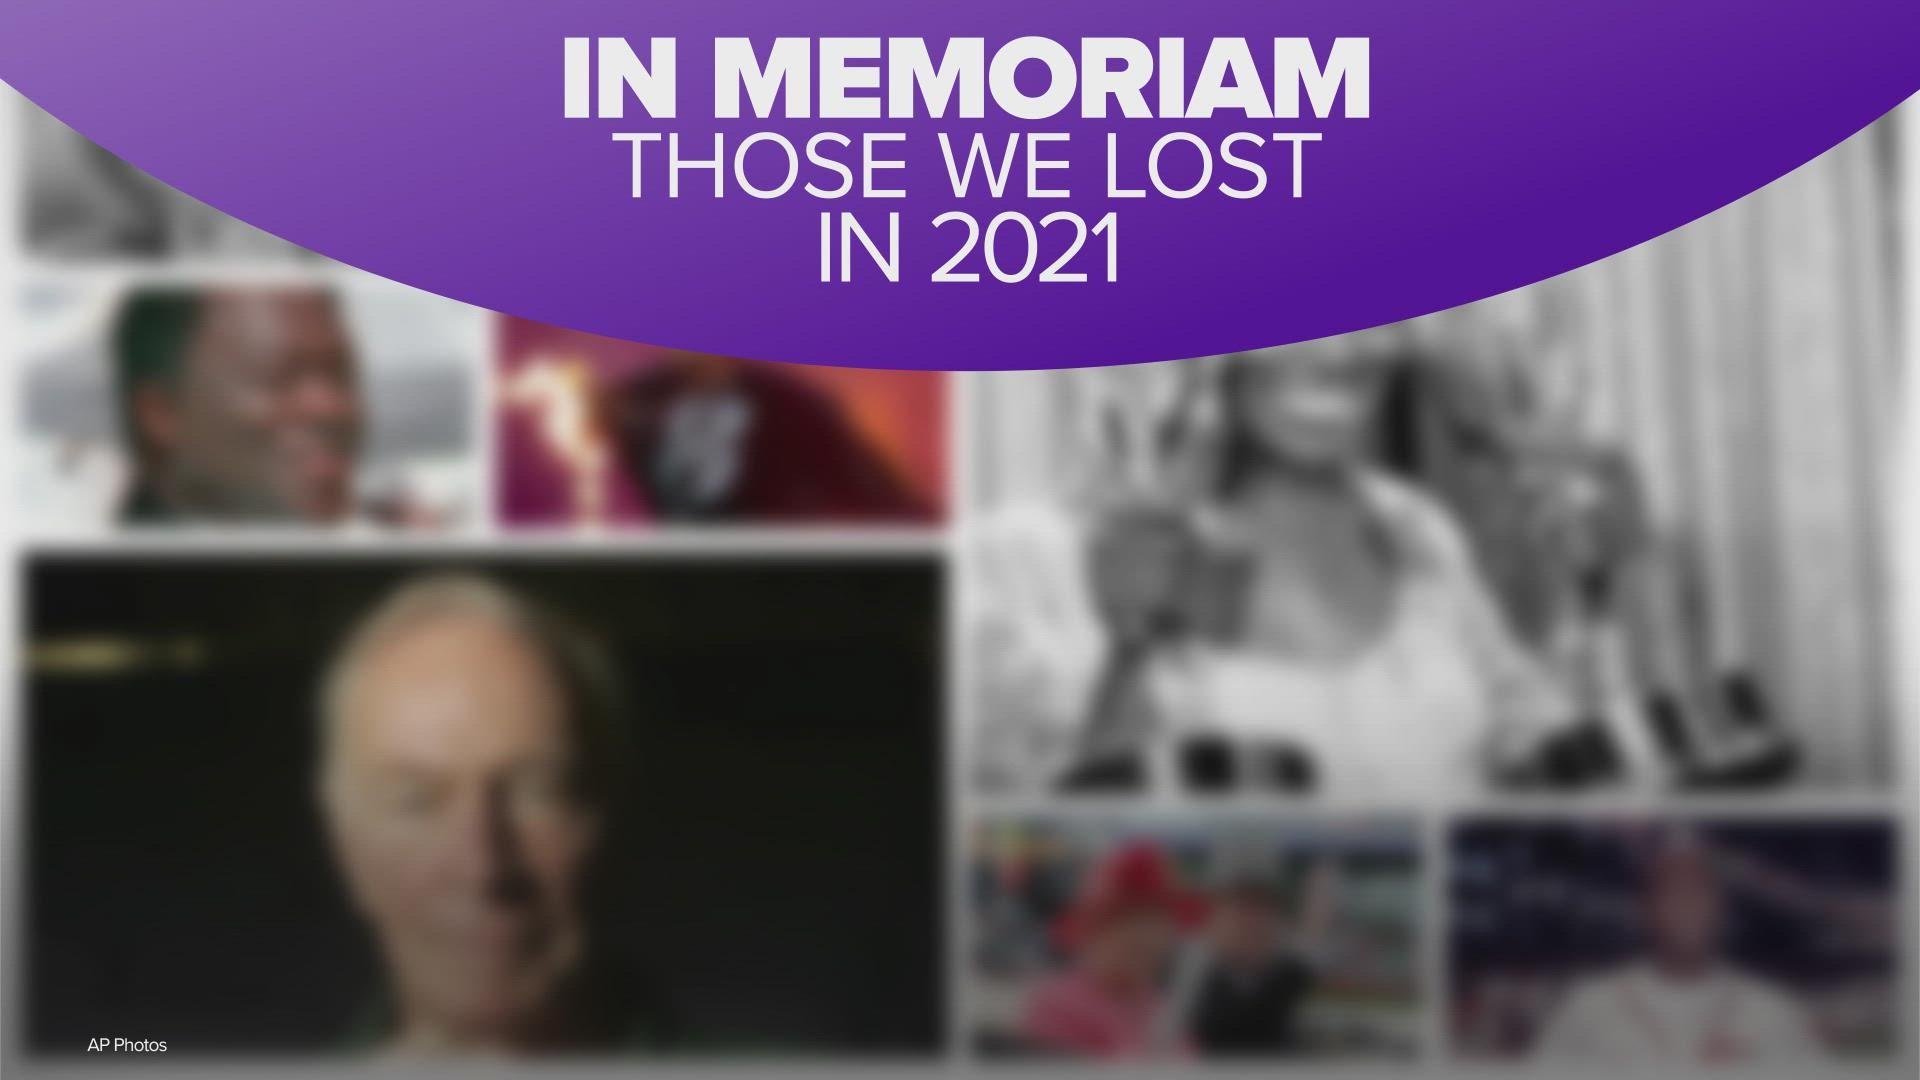 From Christopher Plummer to Hank Aaron to Cicely Tyson, here is a look at some of those we lost in 2021.